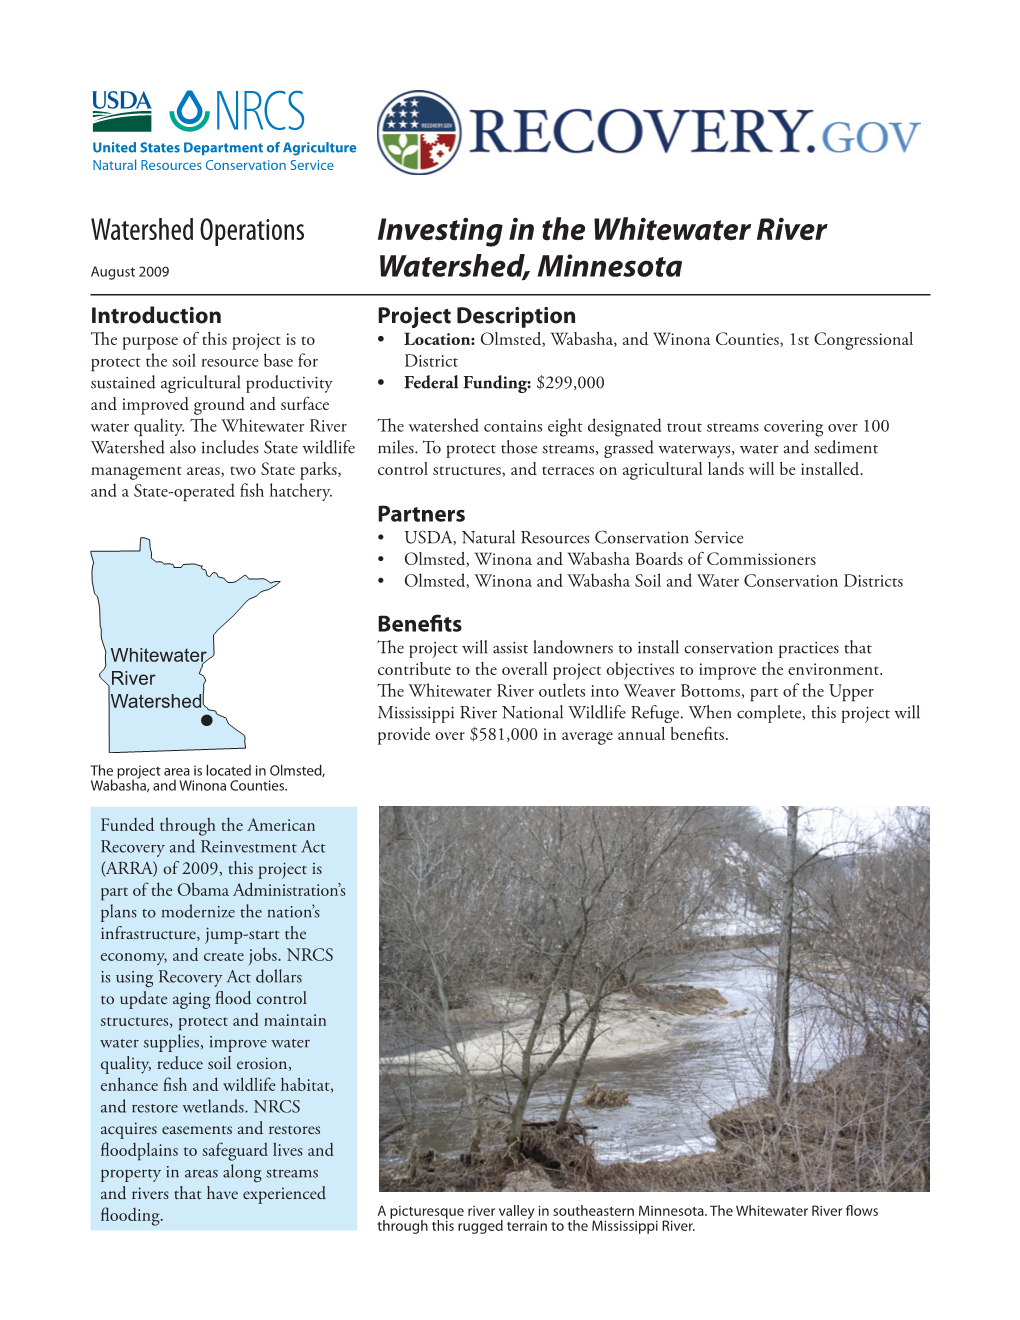 Investing in the Whitewater River Watershed, Minnesota